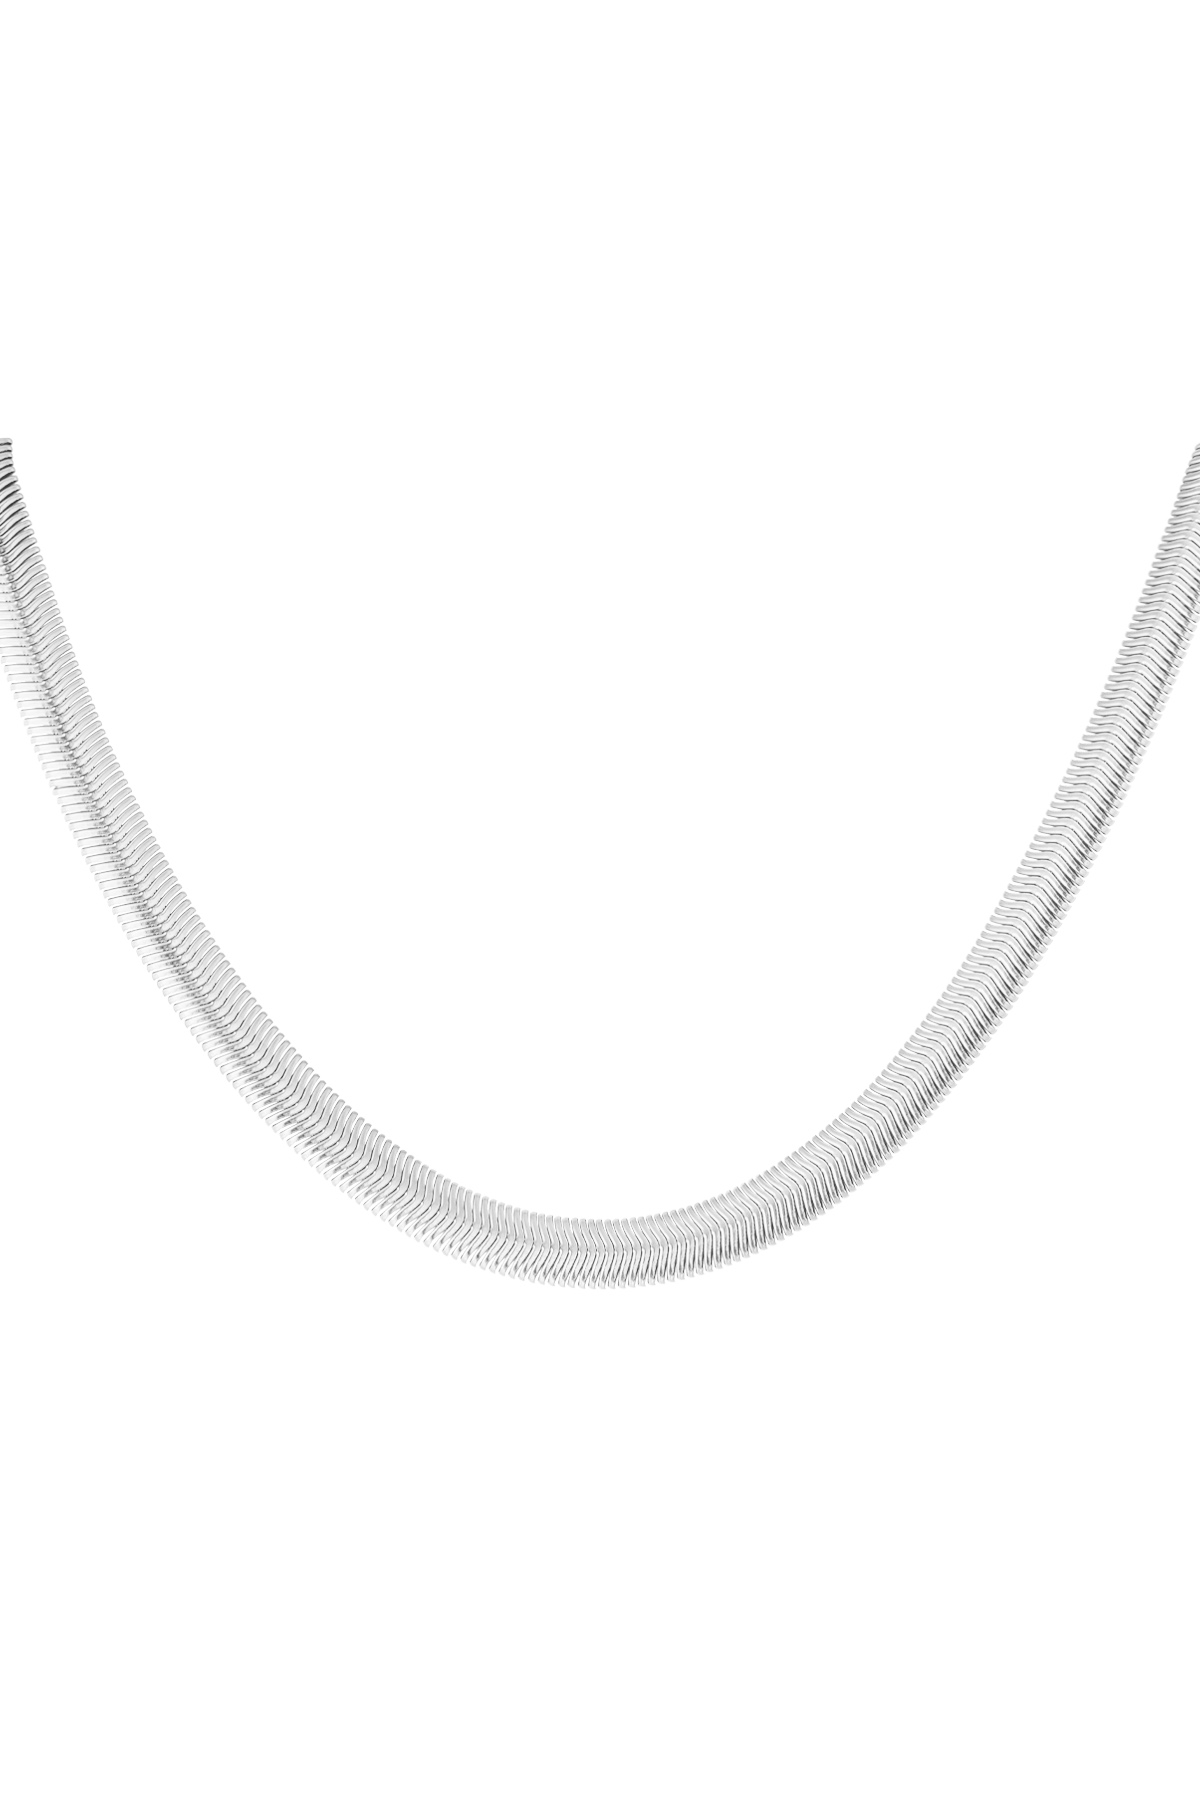 Necklace flat braided - silver